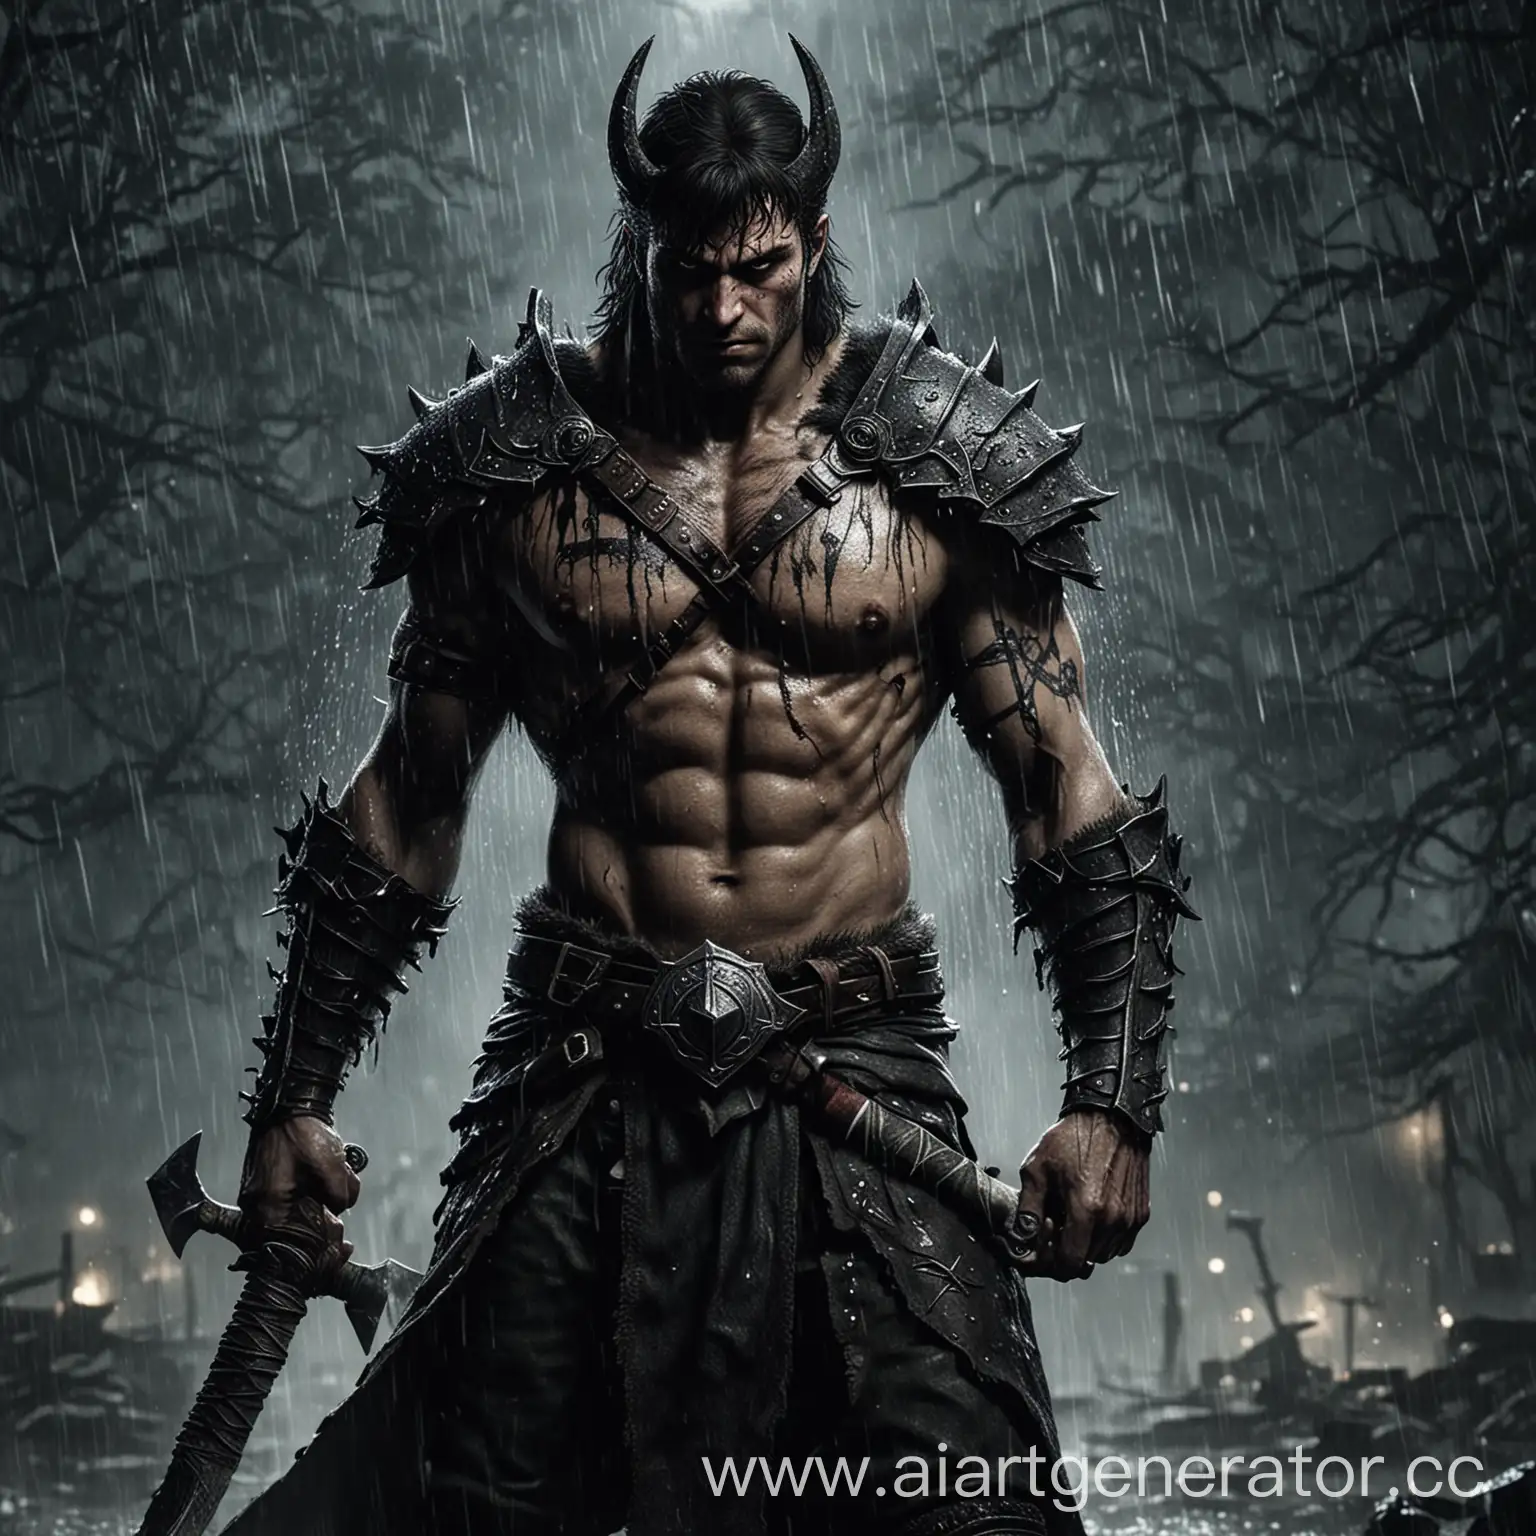 4k picture, berserk from game Skyrim, rain, night, axes in two hands, tatoo body